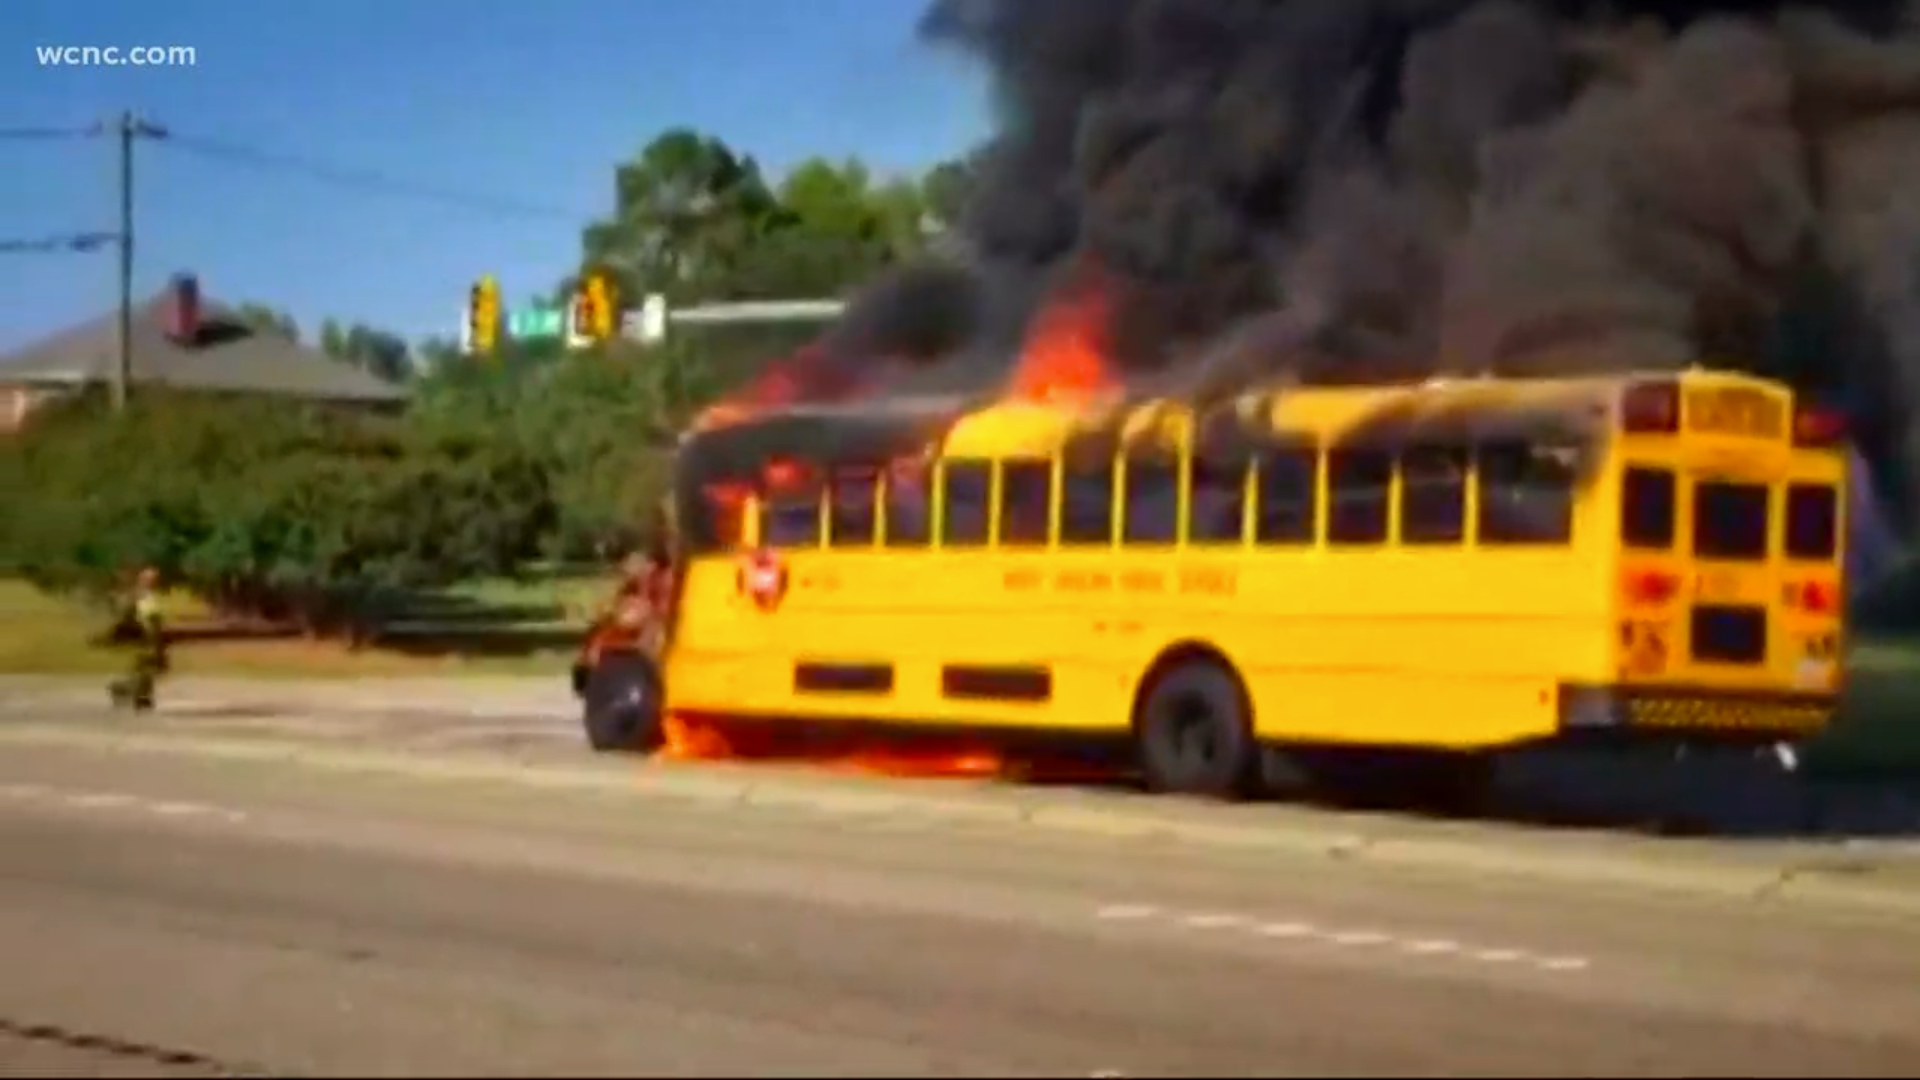 Video from Cary, North Carolina shows a school bus engulfed in flames. The fire broke out just one hour after that bus passed inspection.